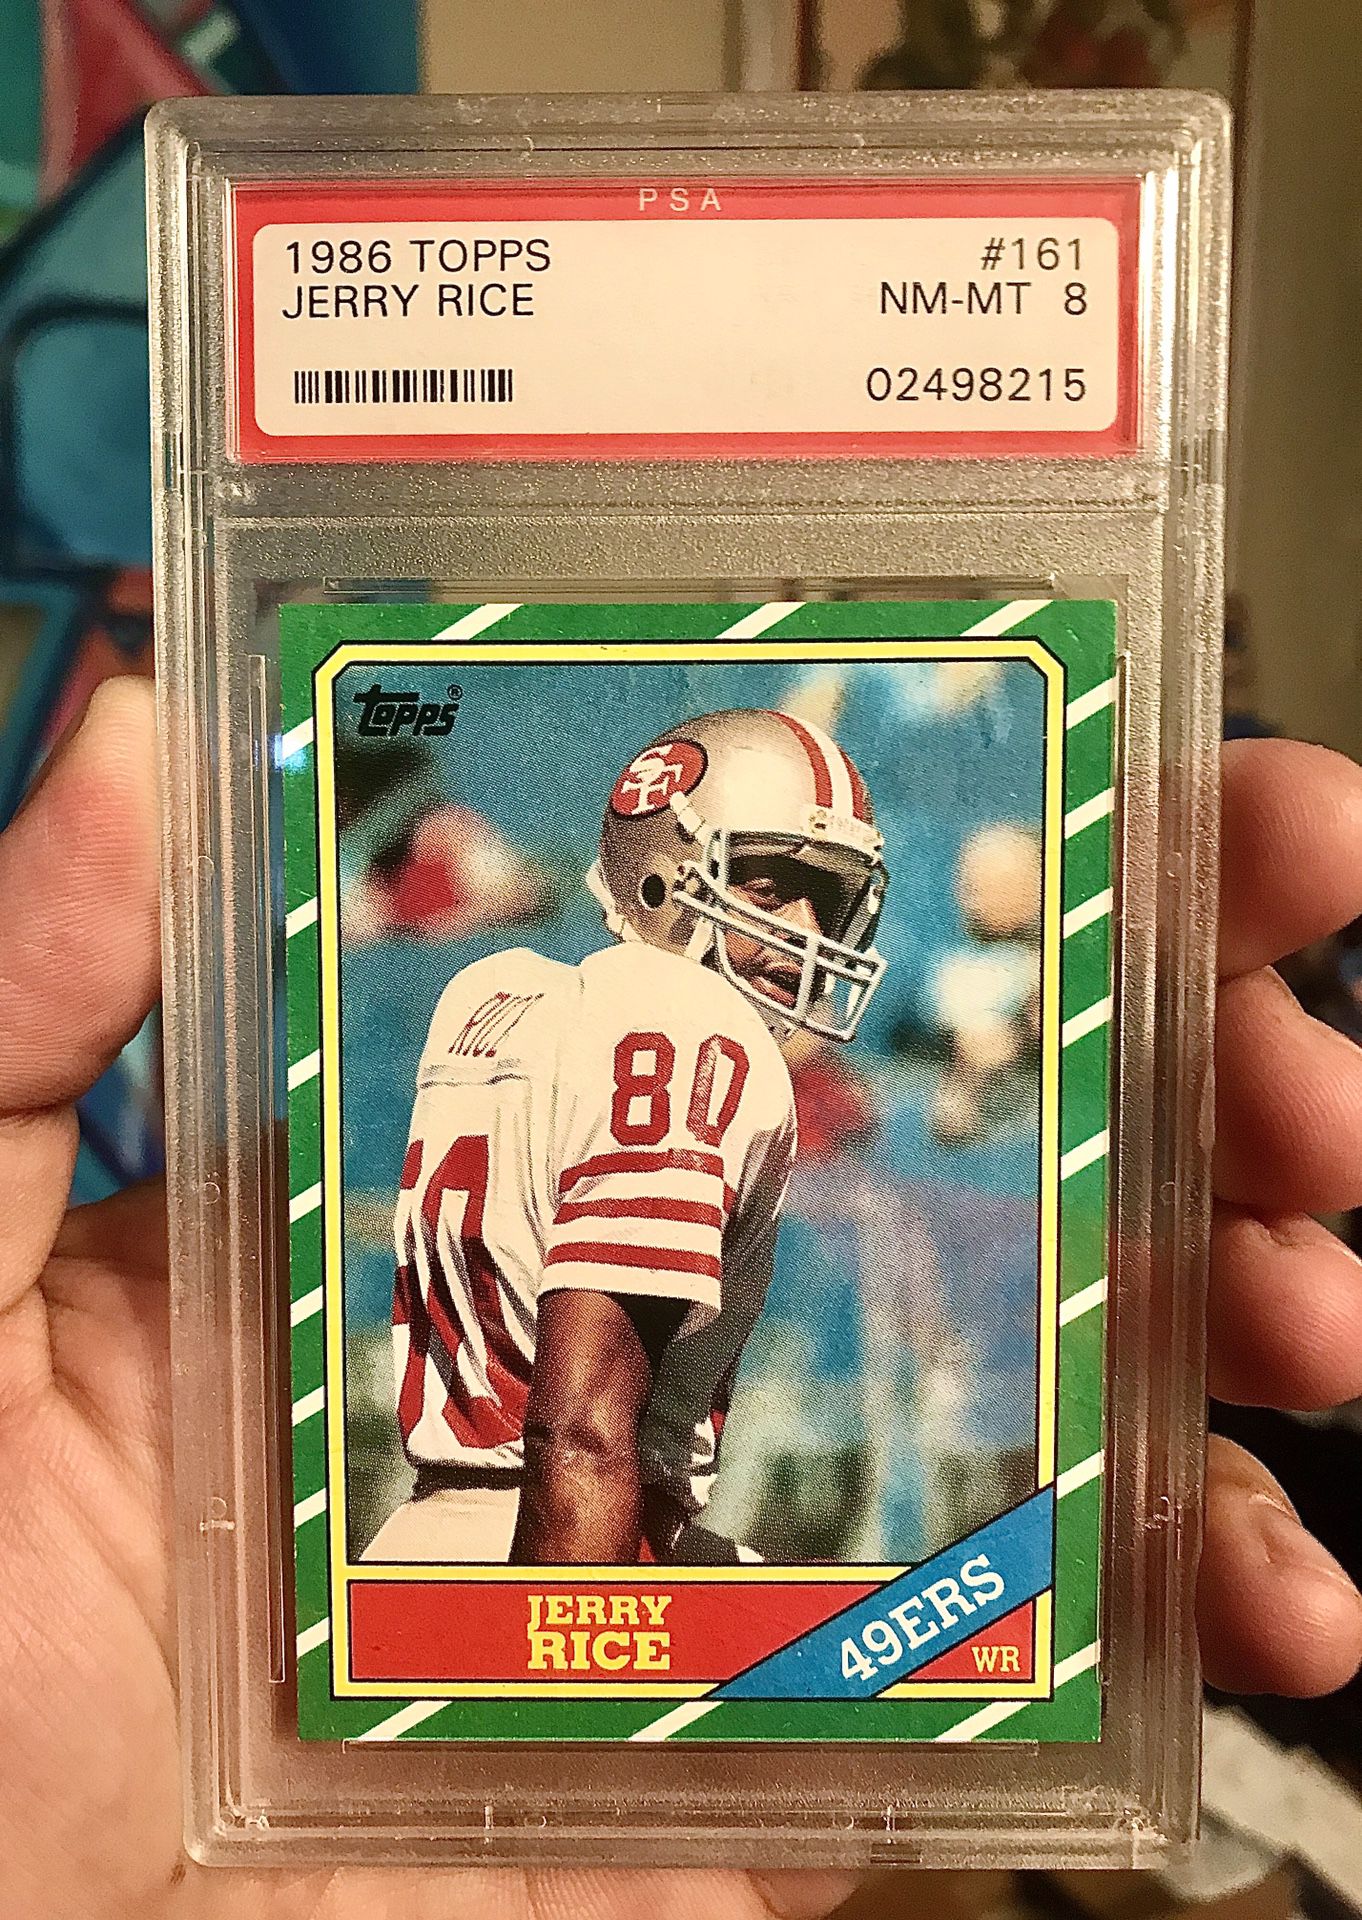 1986 Topps Jerry Rice Rookie Card PSA 8